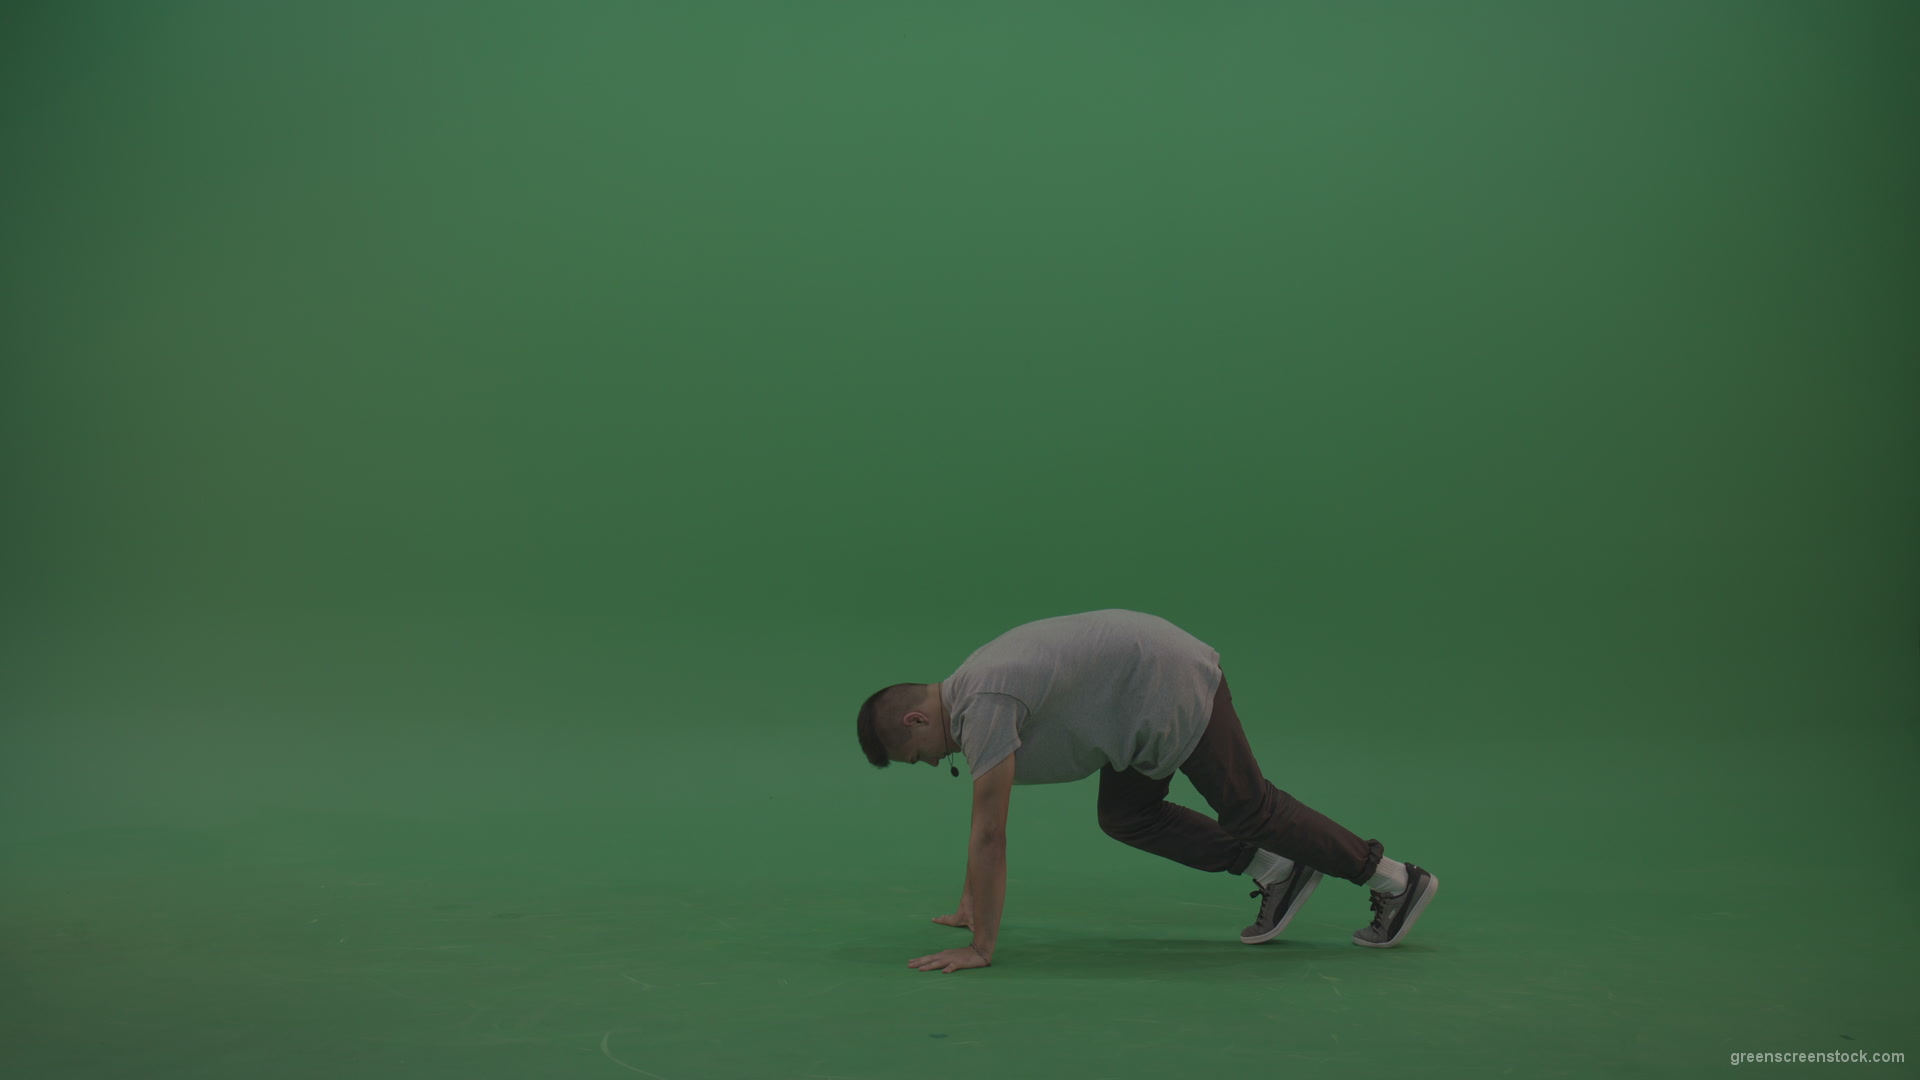 Man-dancing-and-staying-on-hand-on-the-green-floor-green-screen_001 Green Screen Stock